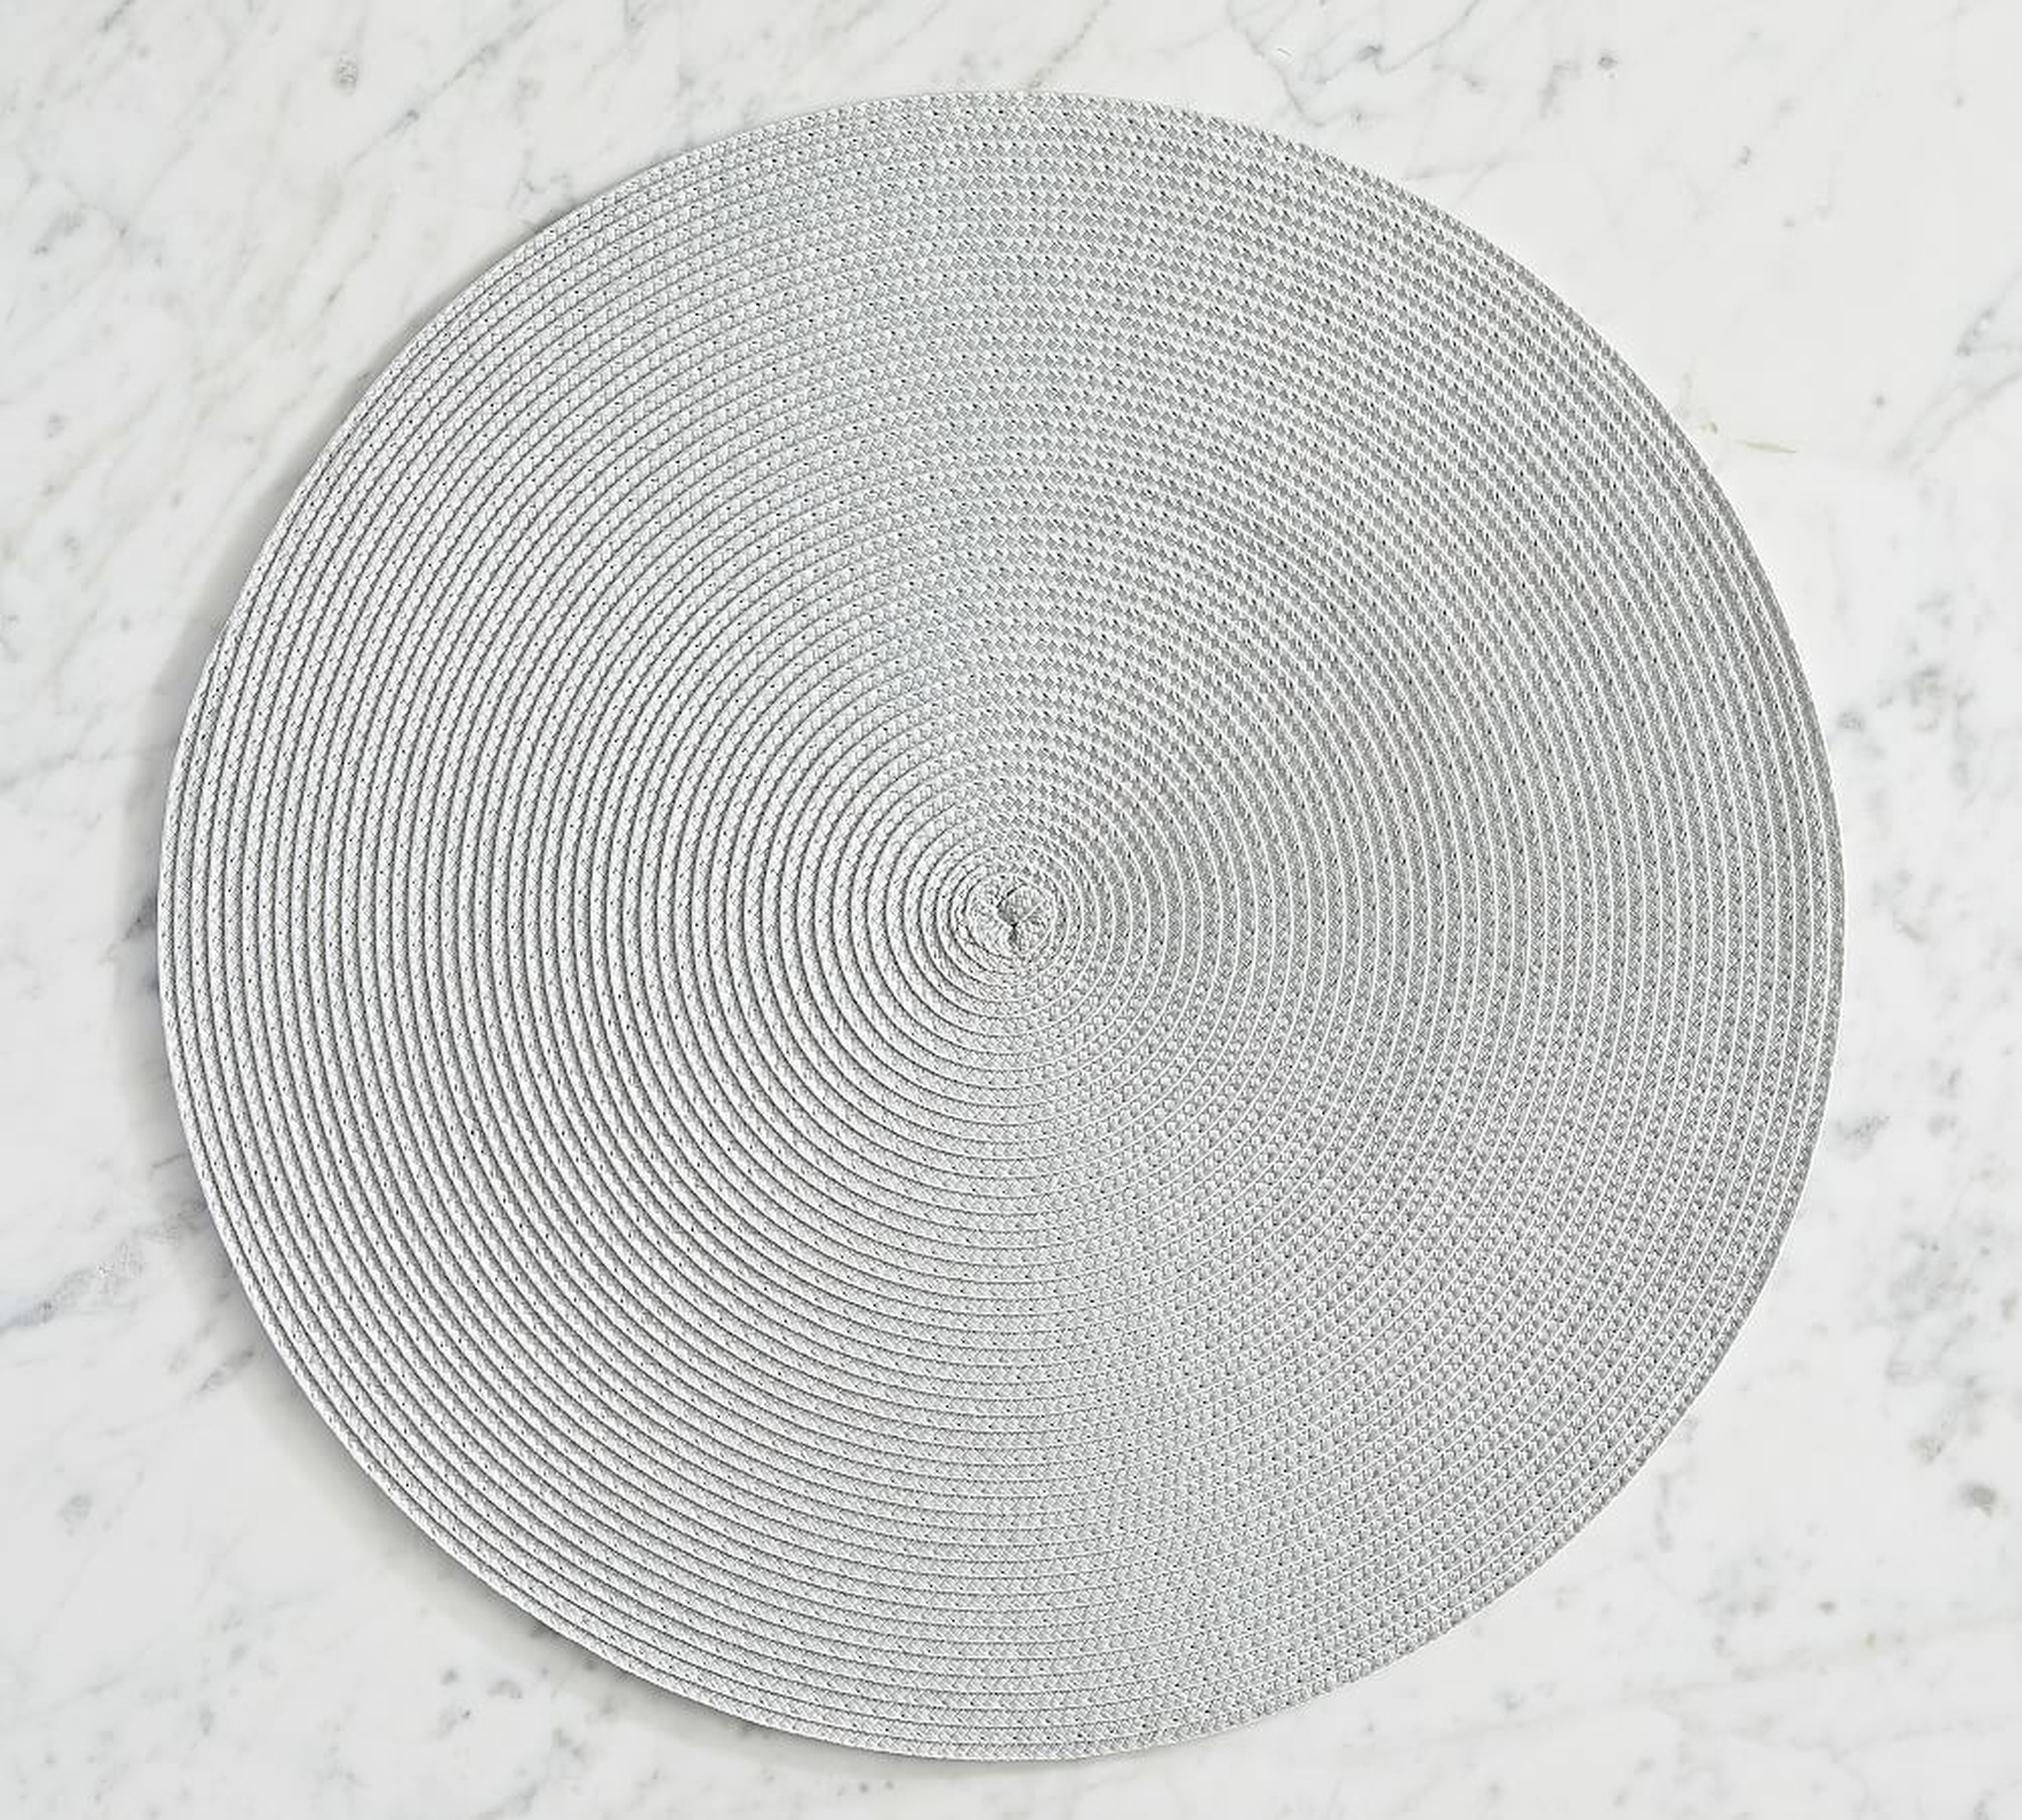 Woven Round Placemats, Set of 4 - Gray - Pottery Barn